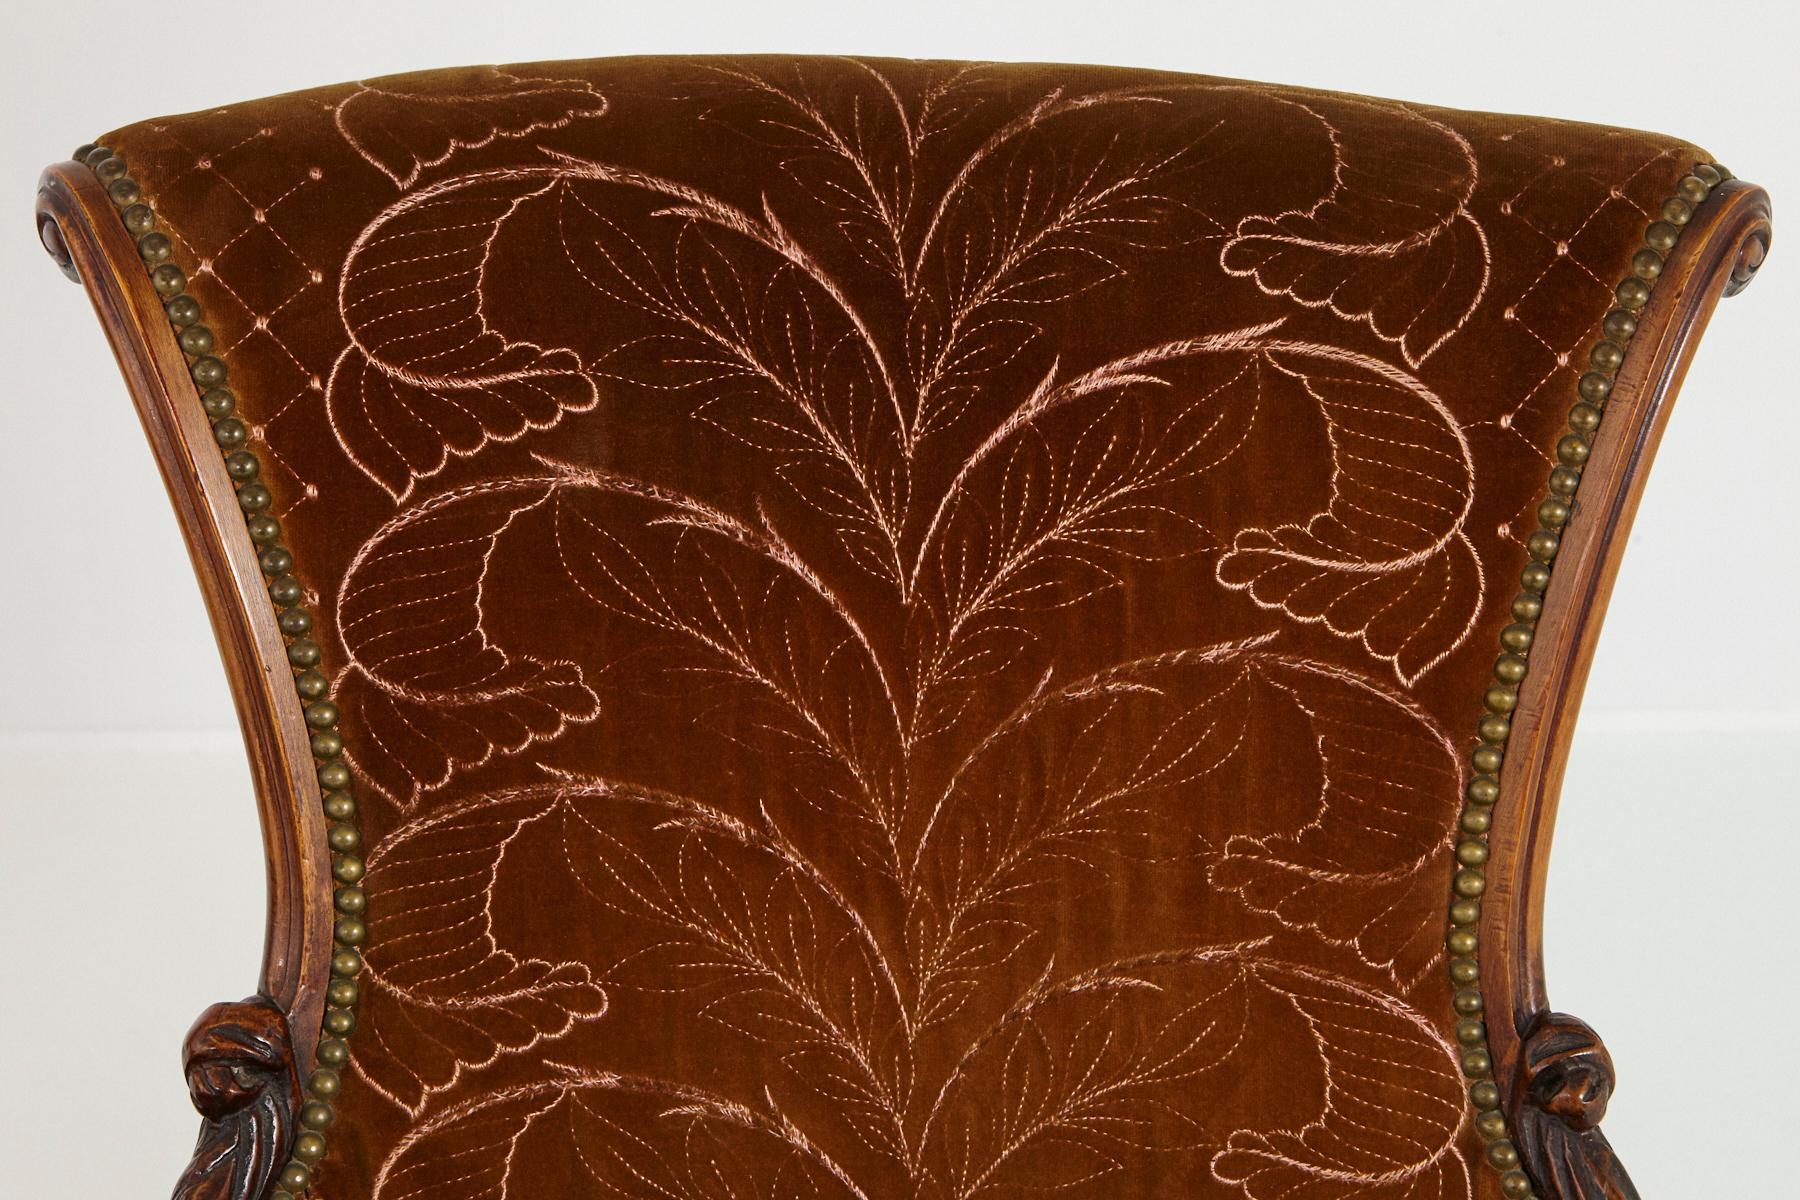 Pair of French Art Nouveau Armchairs, Two-Tone Cognac Colored Embroidered Velvet 6